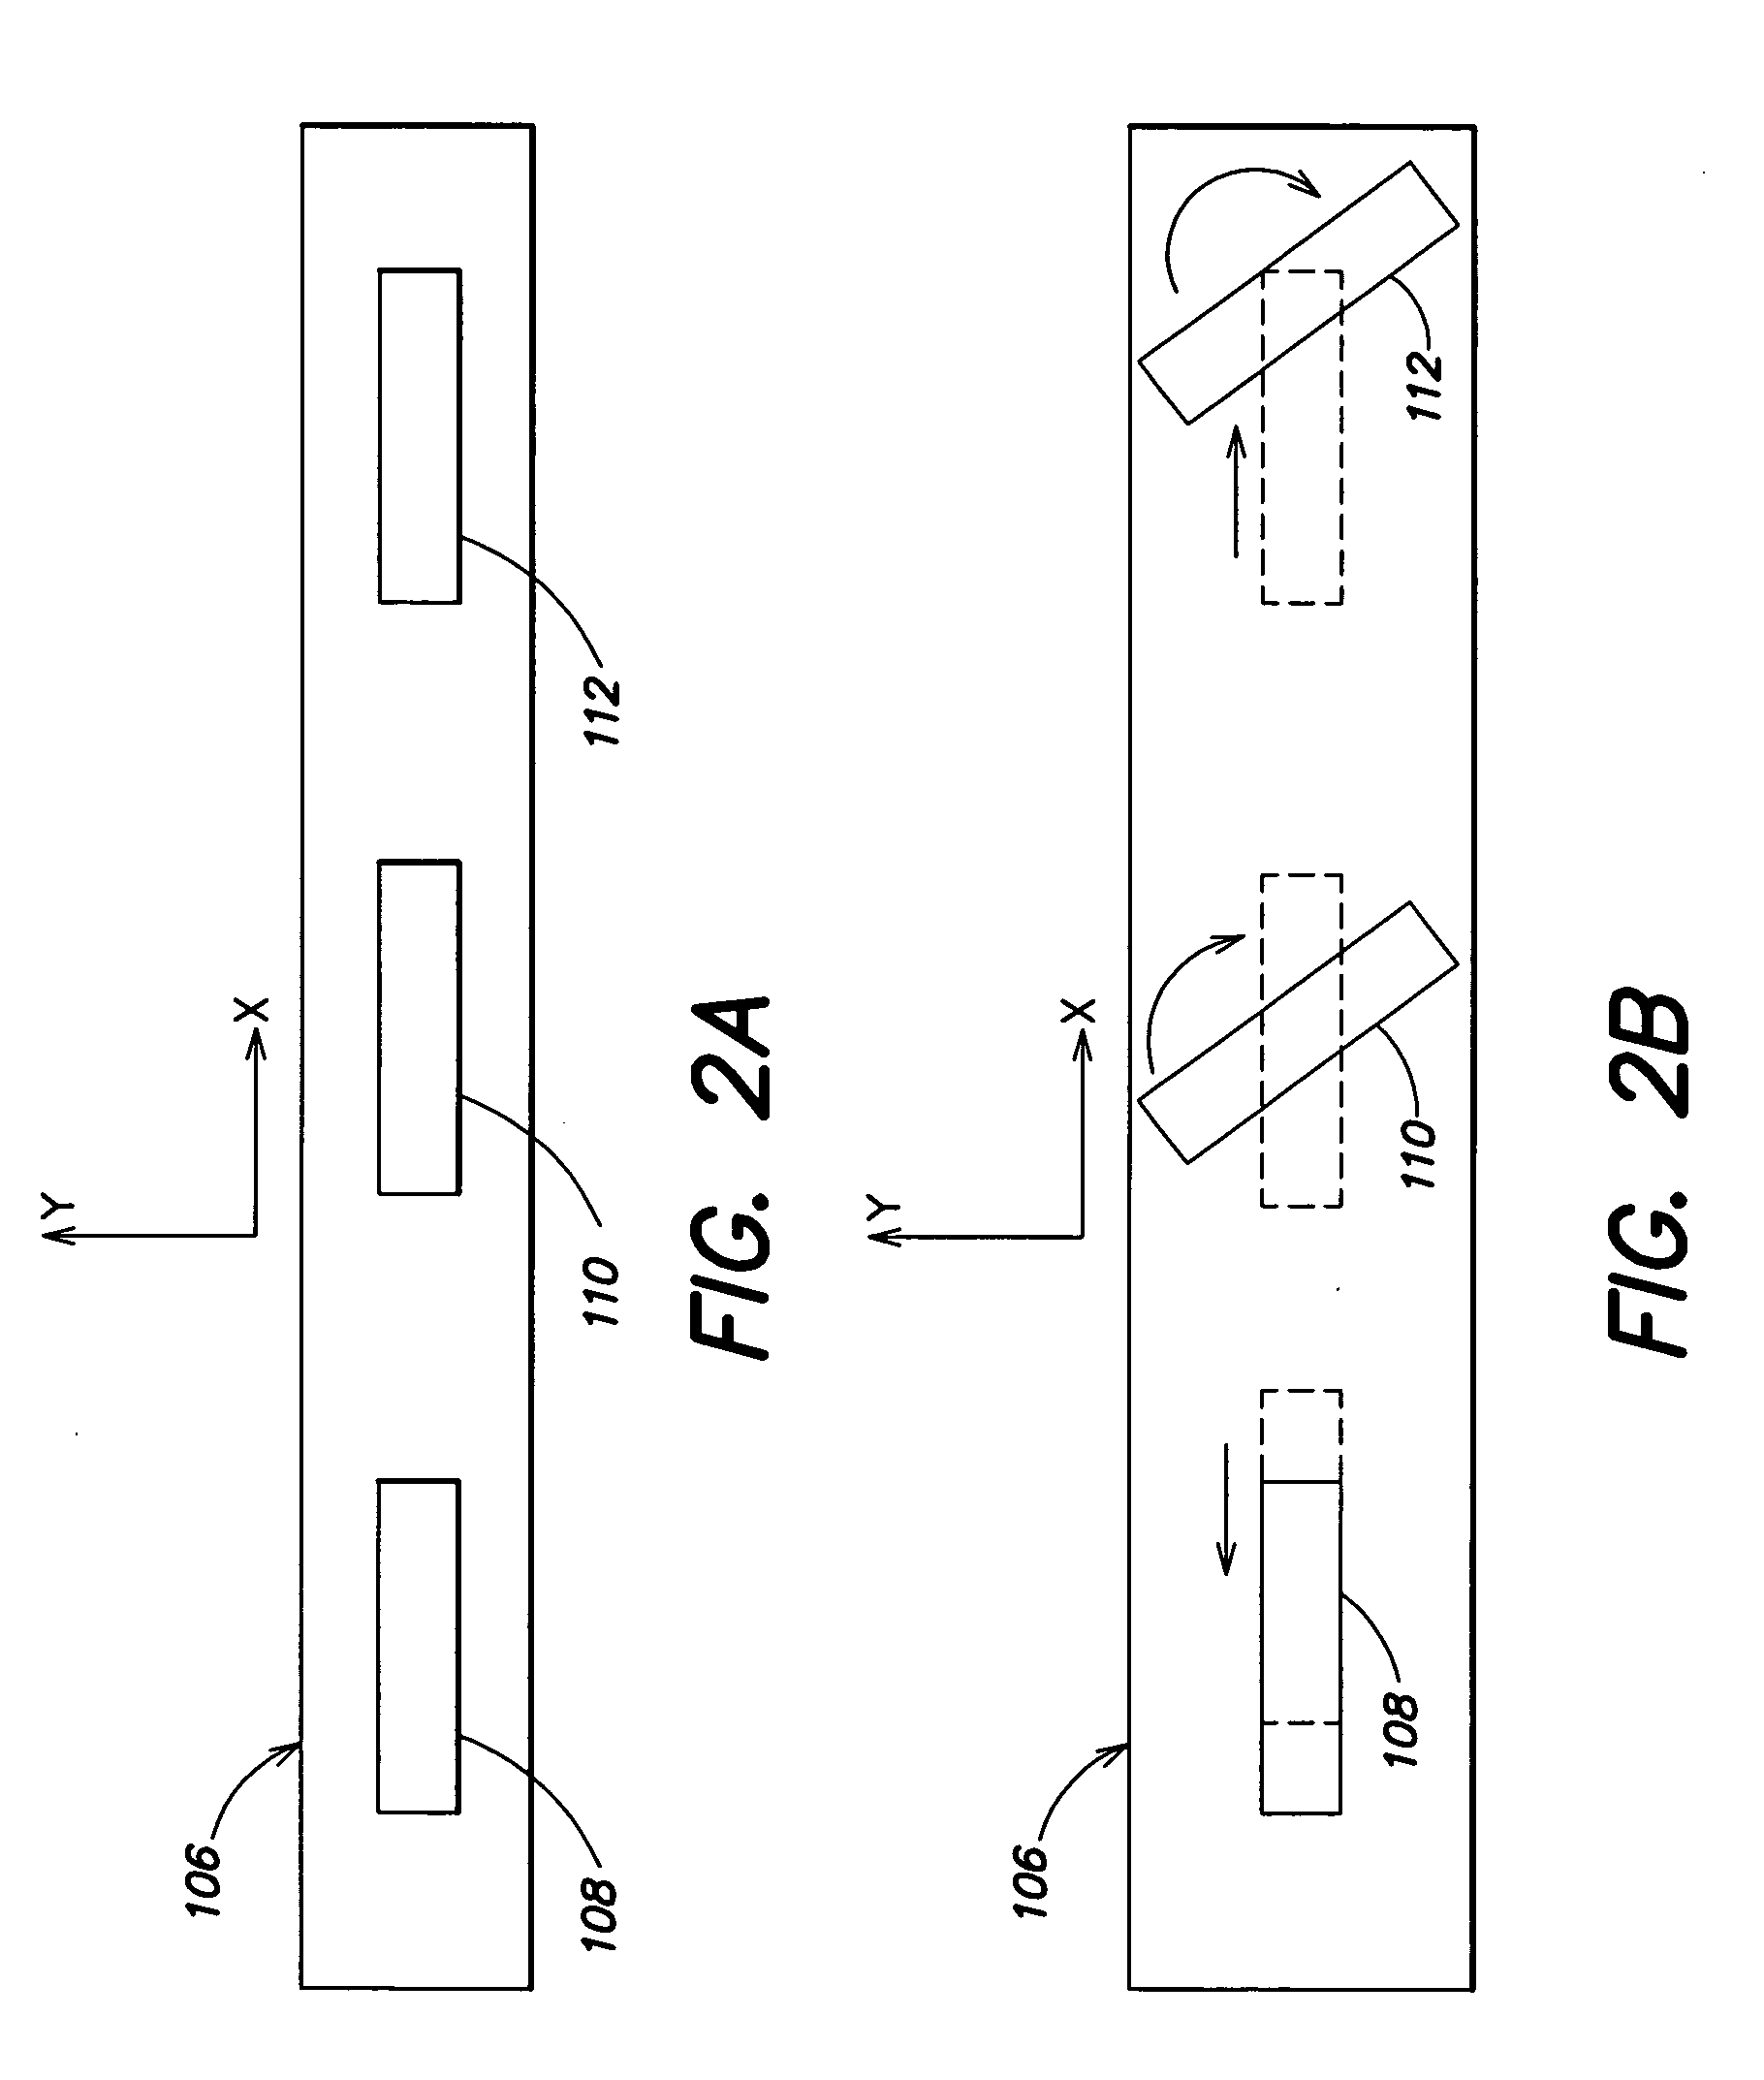 Apparatus and methods for an inkjet head support having an inkjet head capable of independent lateral movement